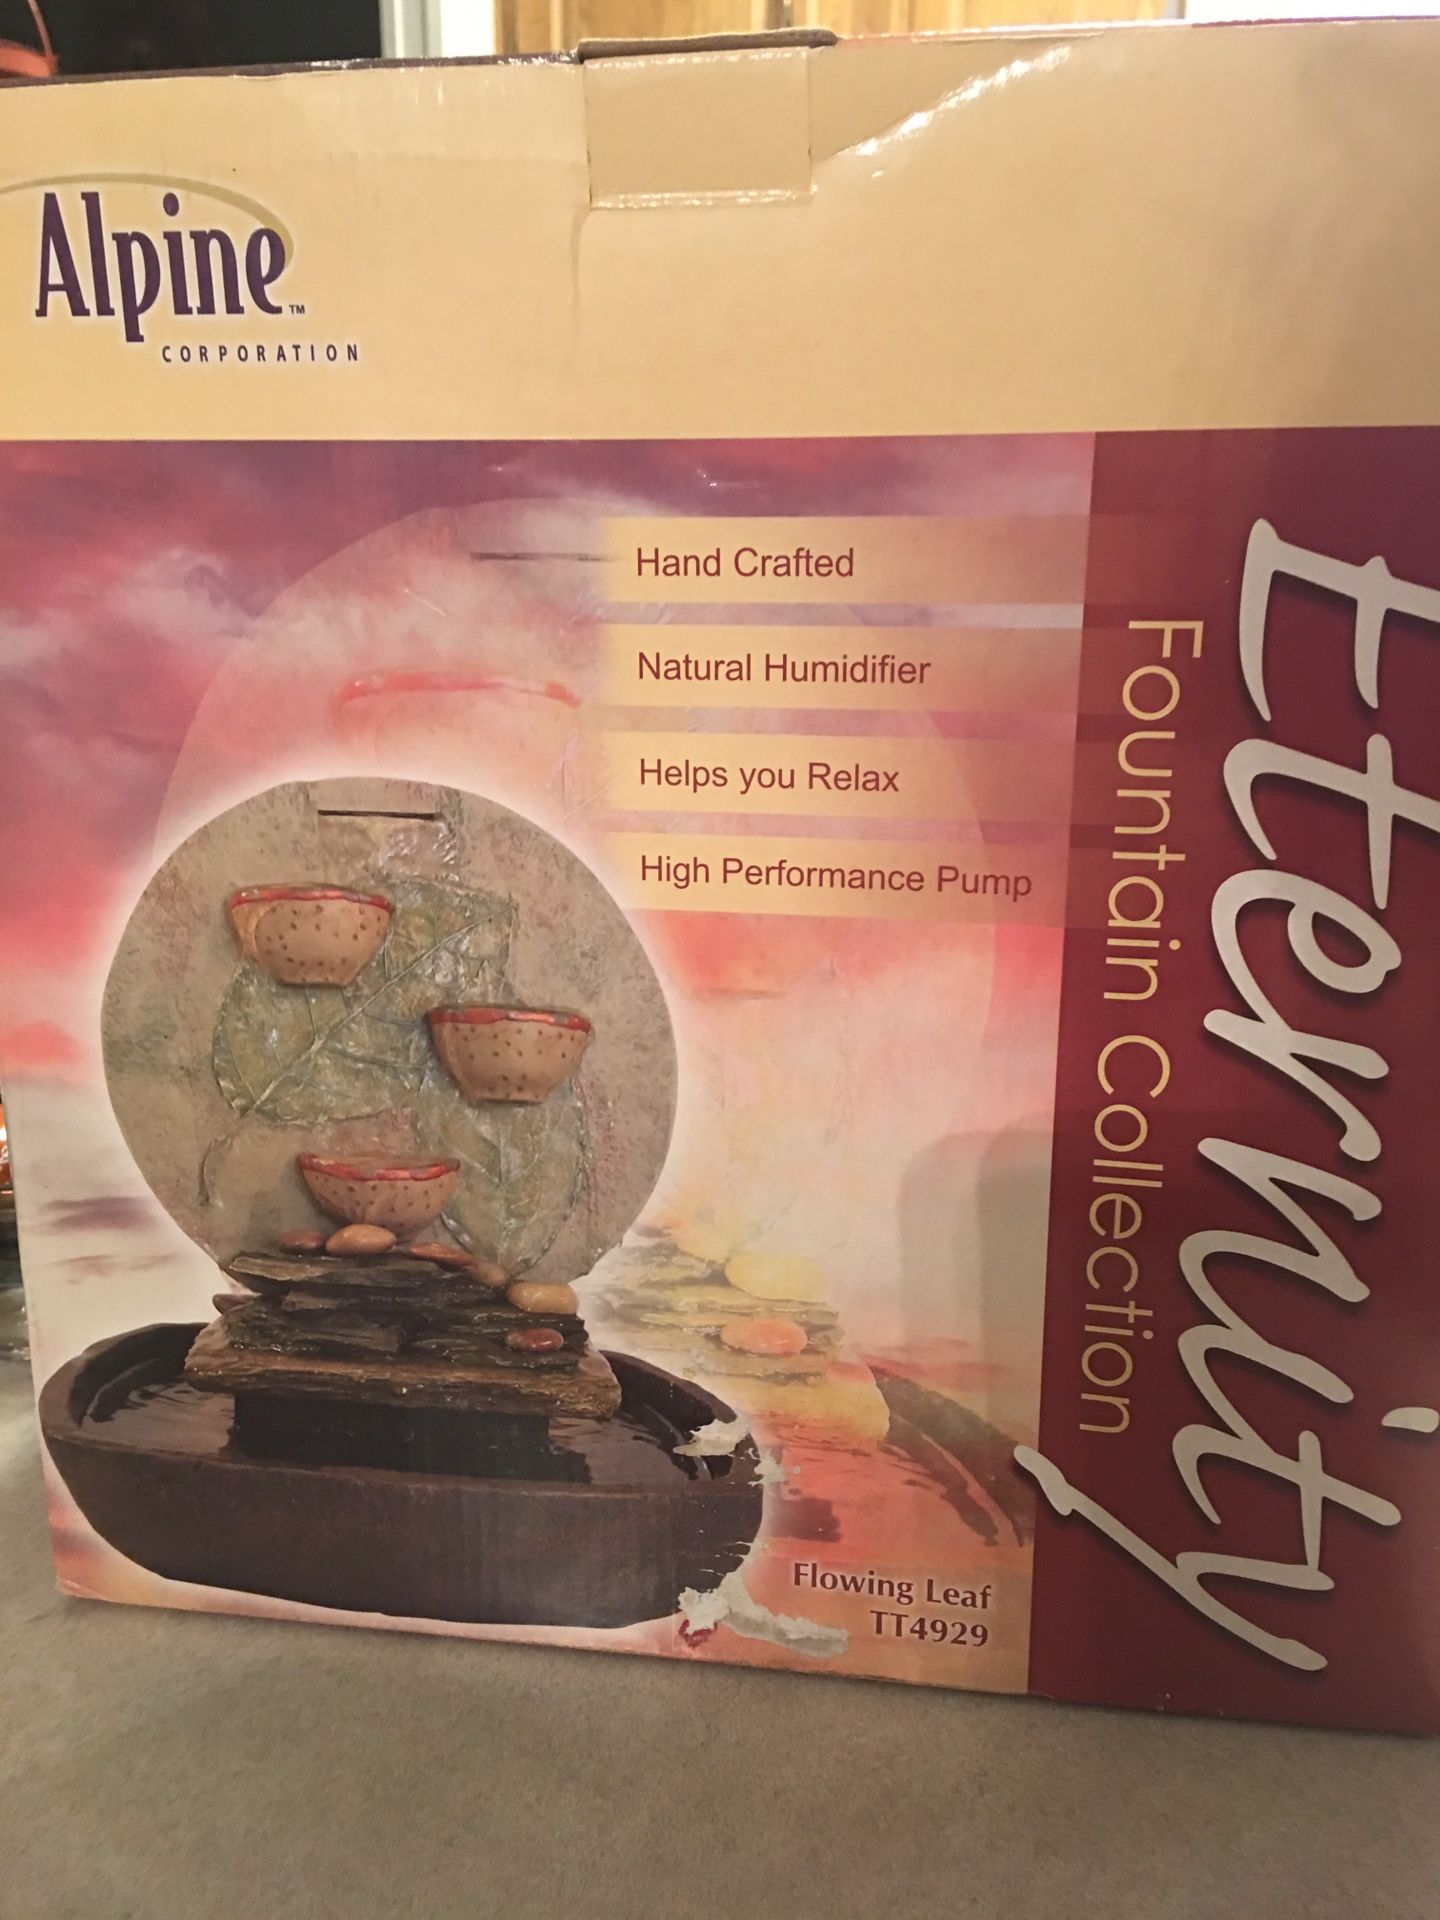 Eternity Fountain Collection. Alpine. Hand Crafted. Natural Humidifier. Helps you Relax.